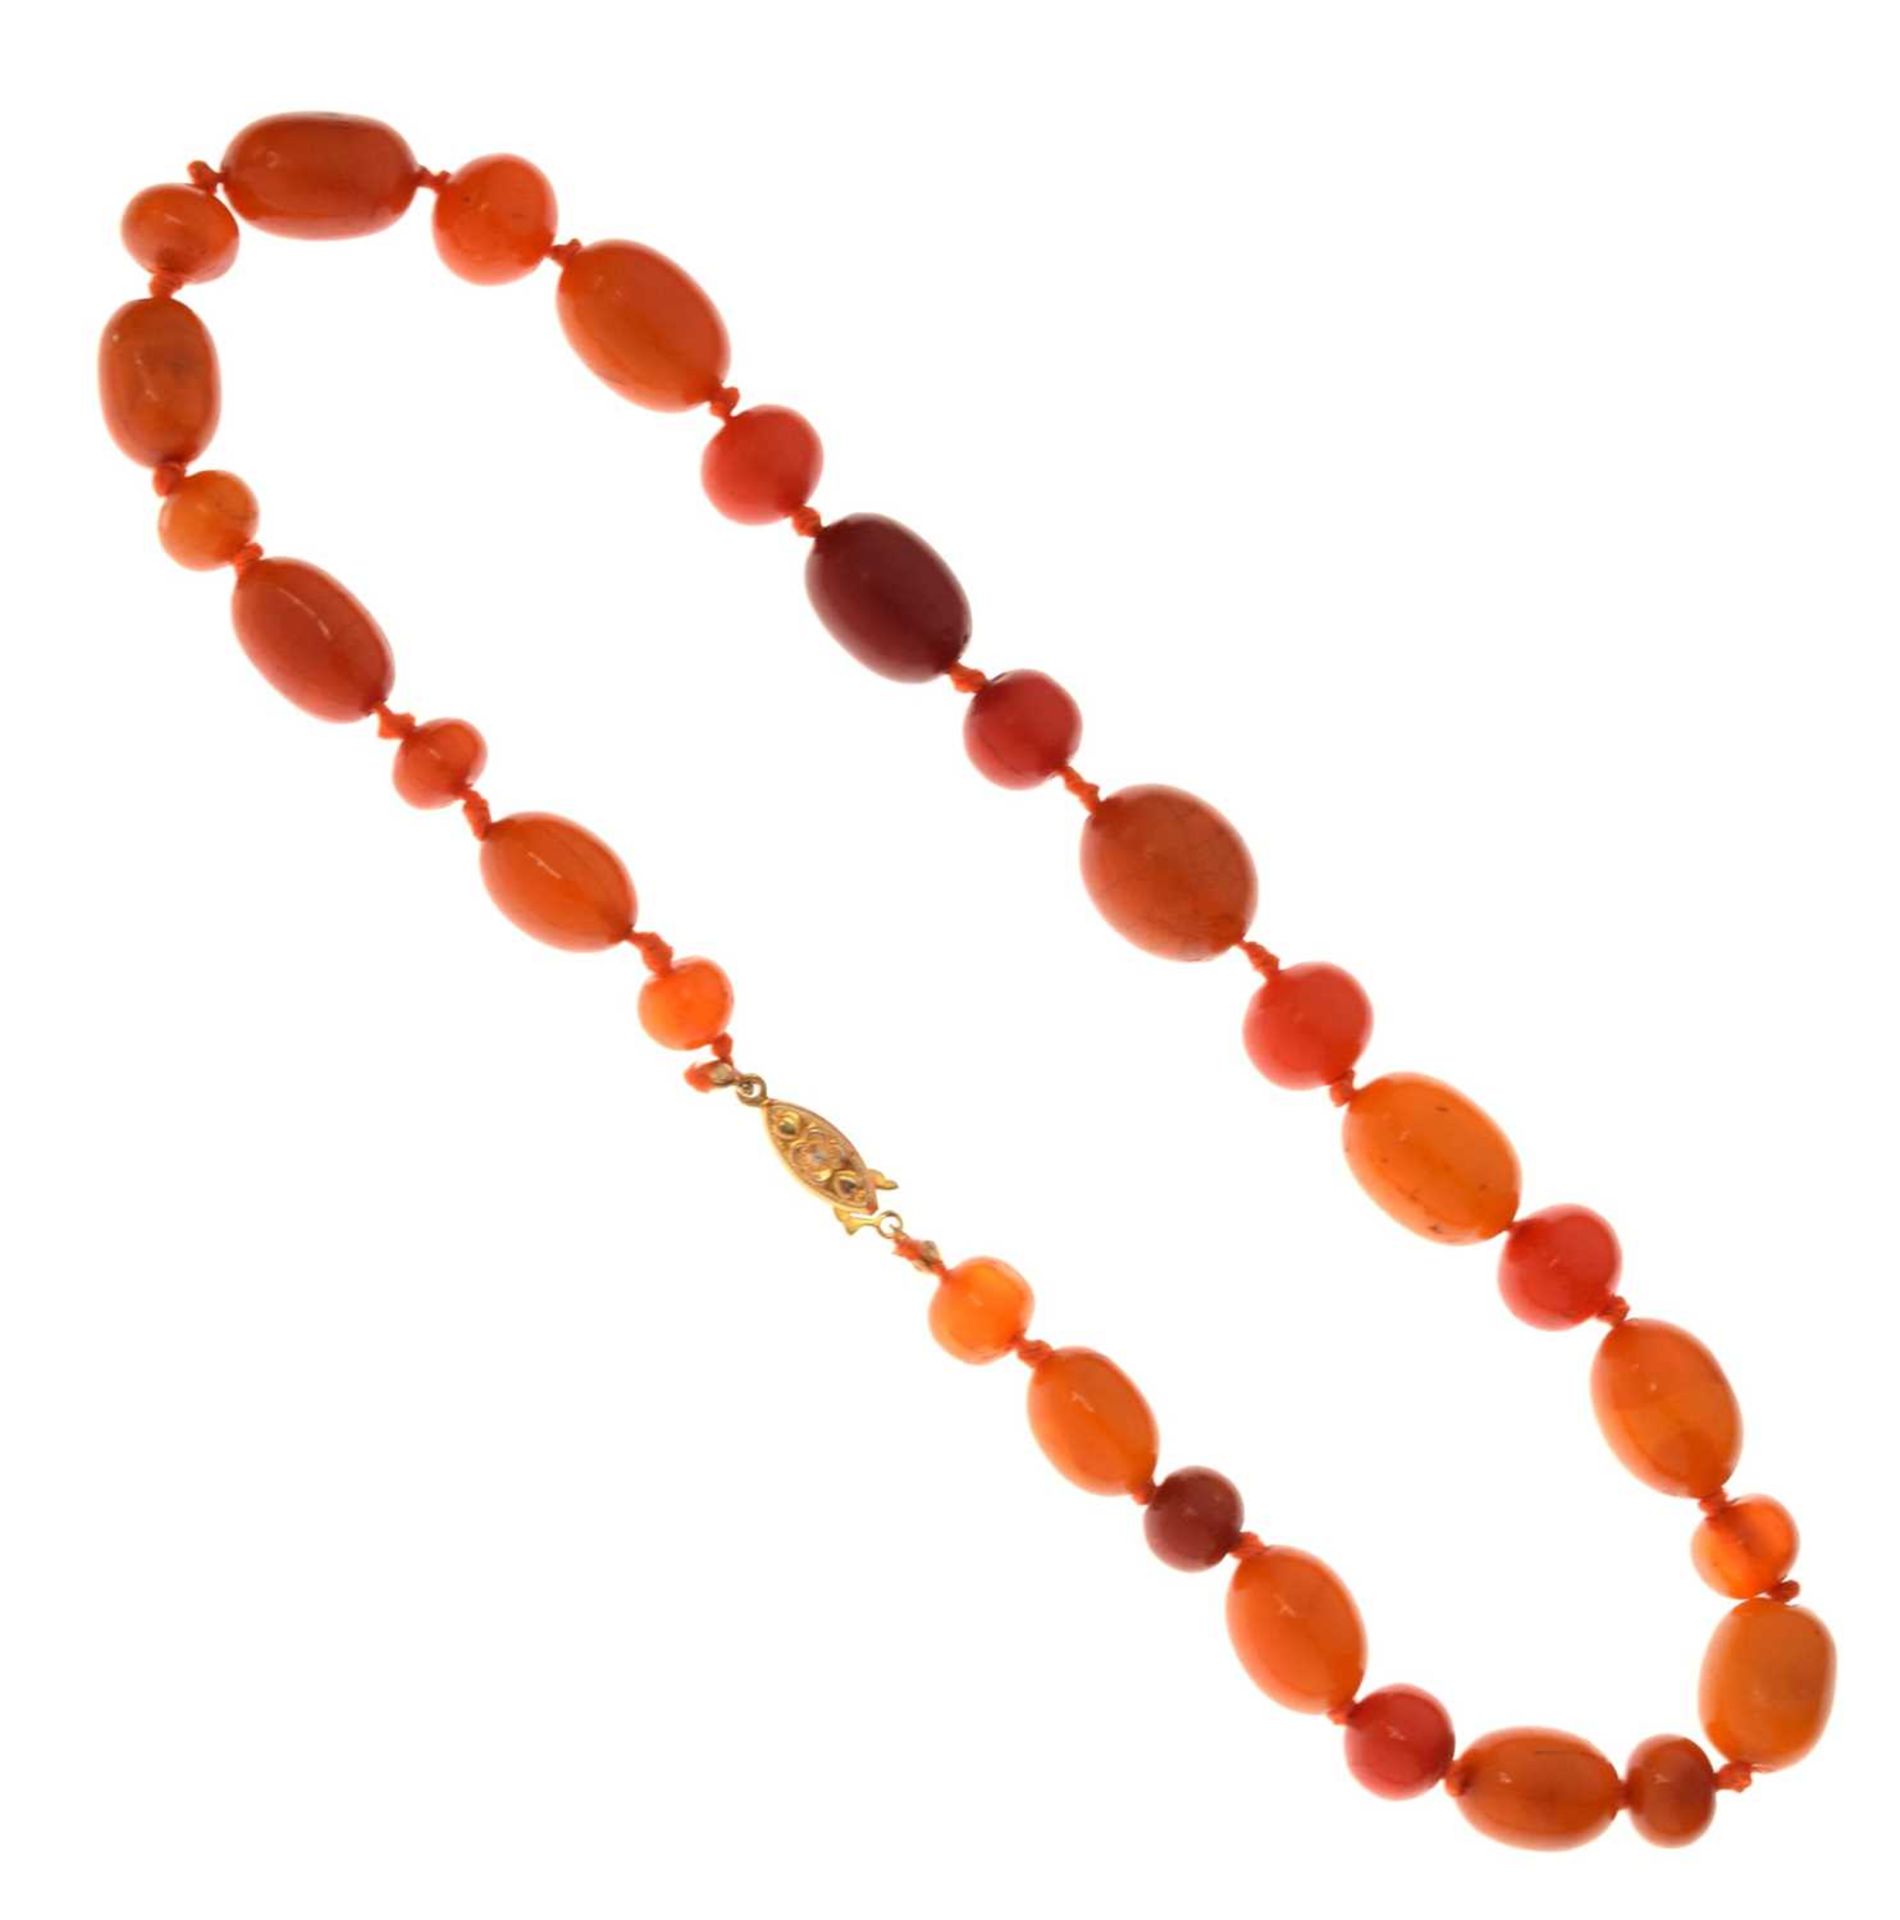 'Butterscotch amber' coloured bead necklace